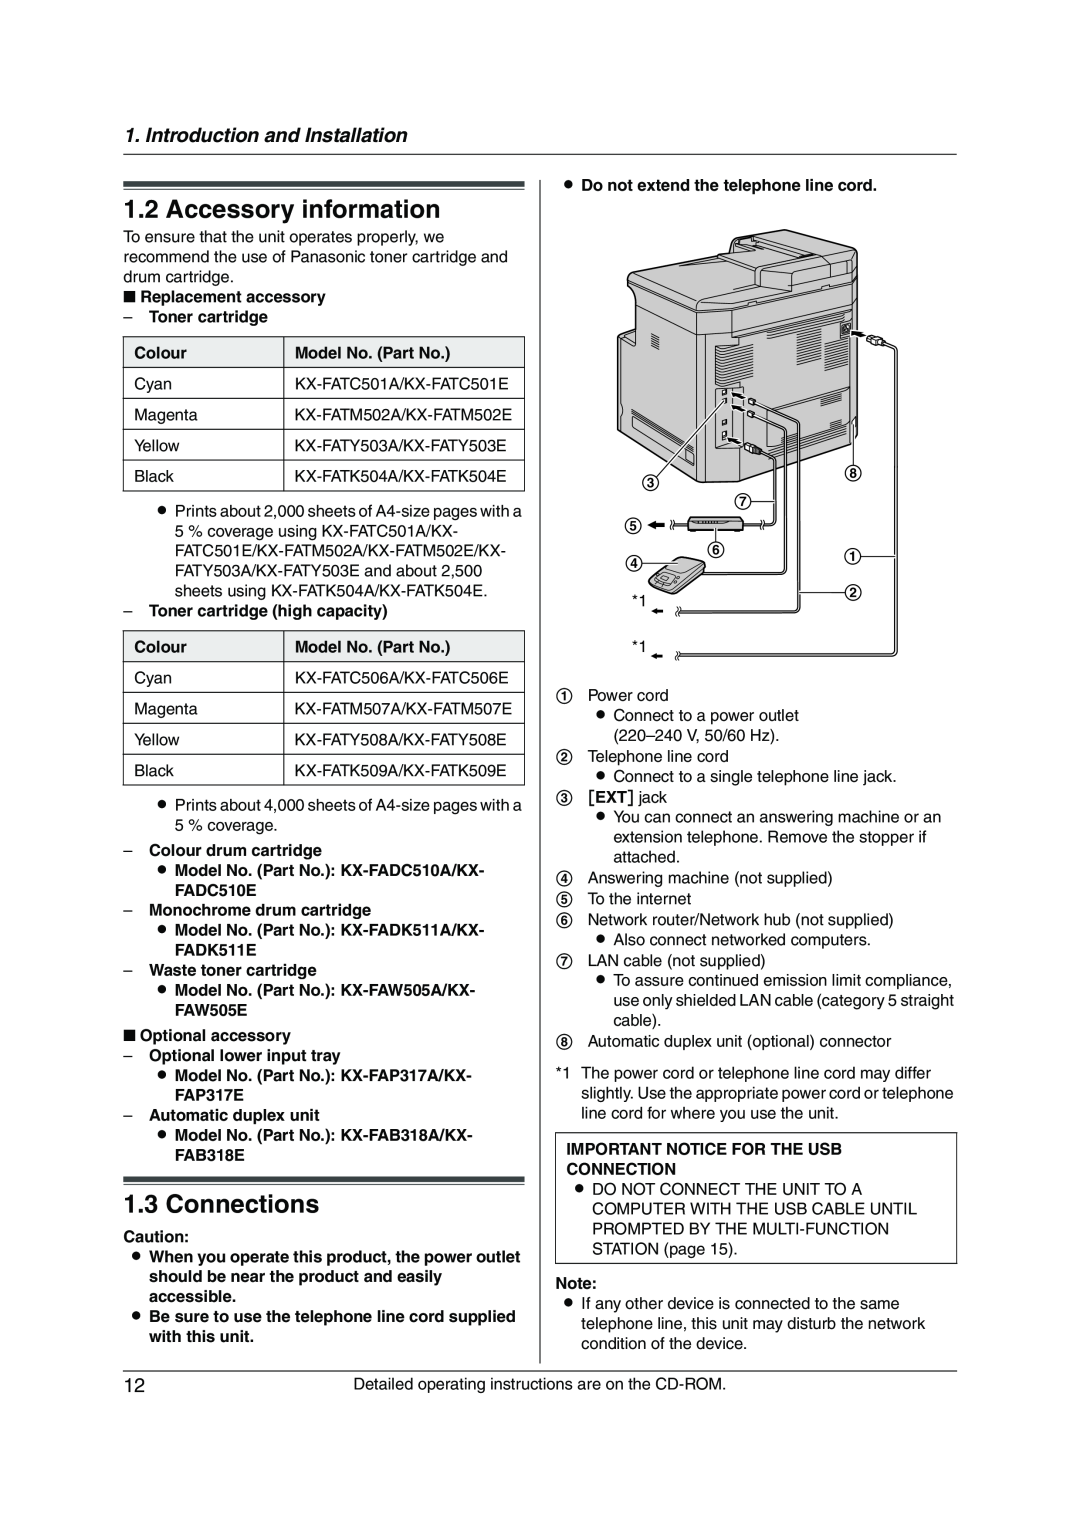 Panasonic KX-MC6020CX operating instructions Accessory information, Connections, Introduction and Installation 